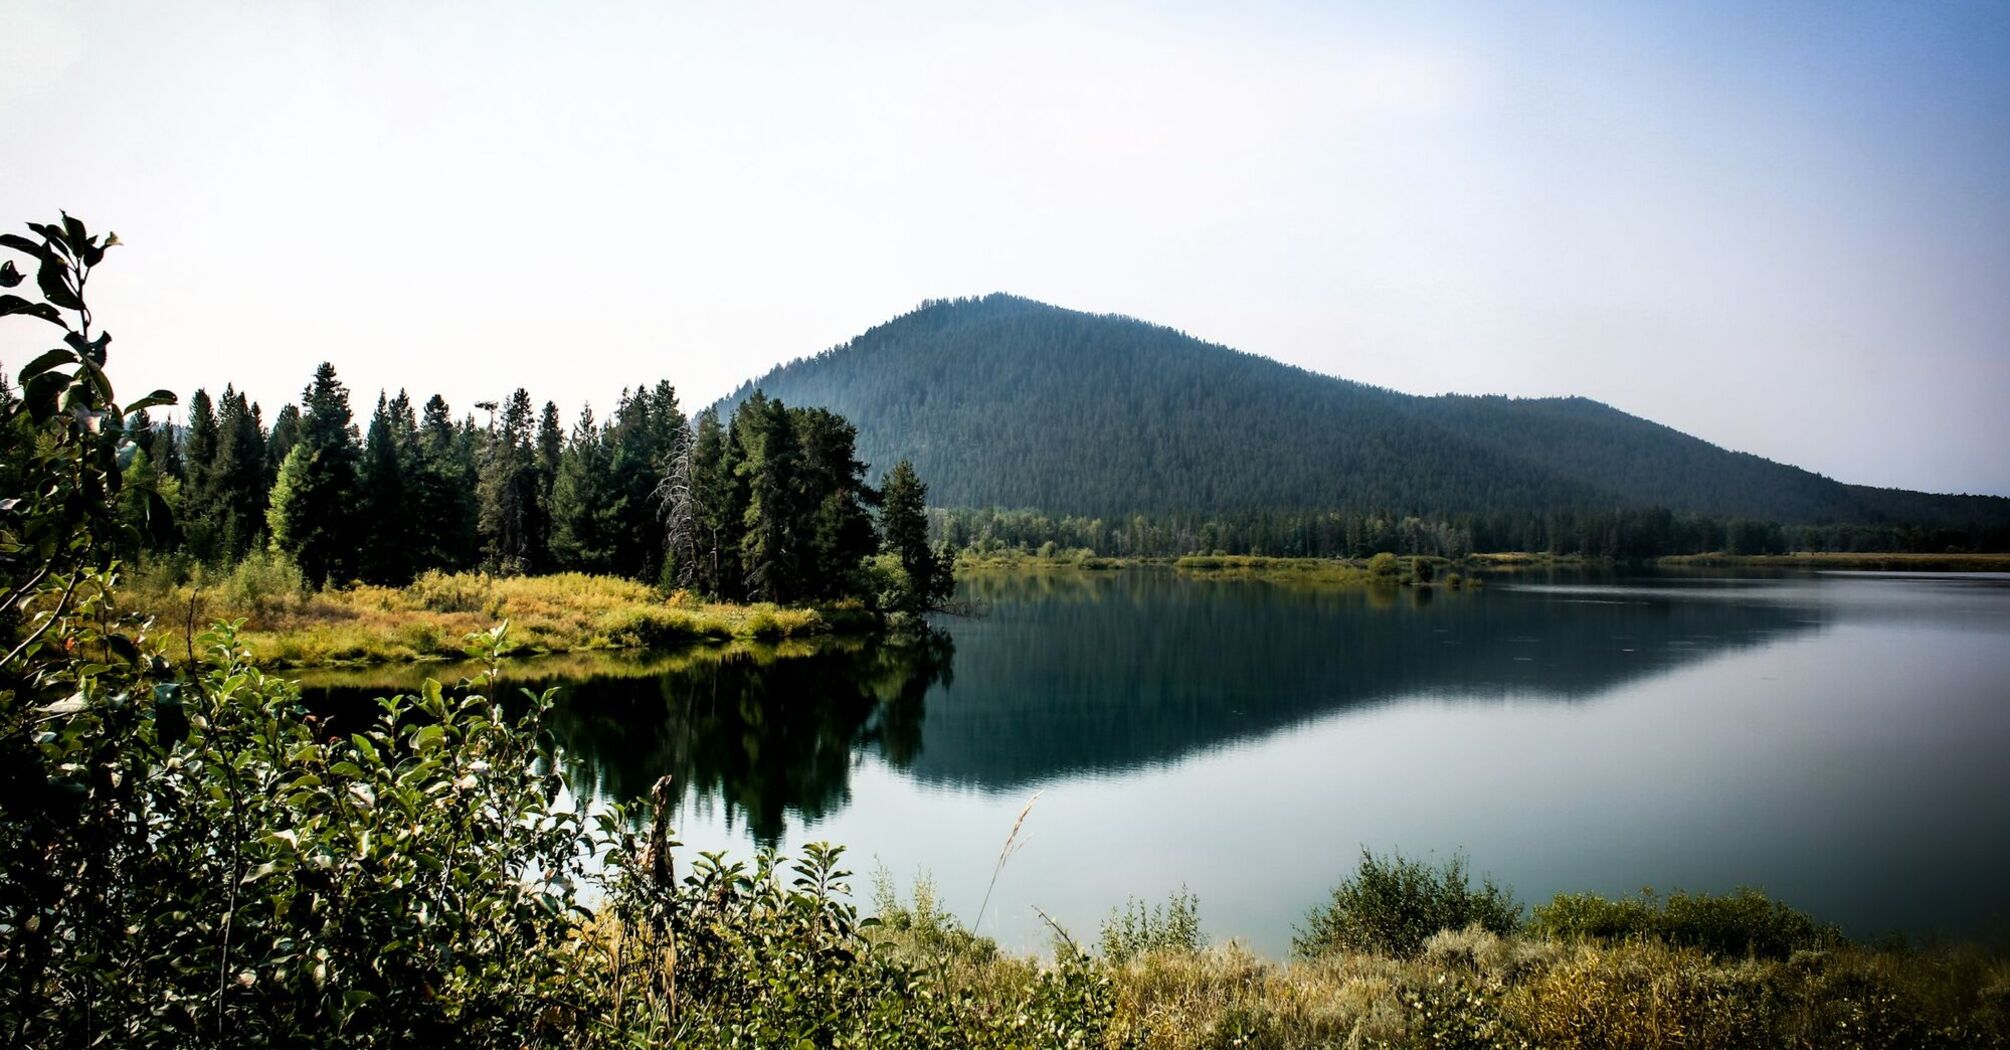 A serene lake surrounded by trees with a mountain in the background